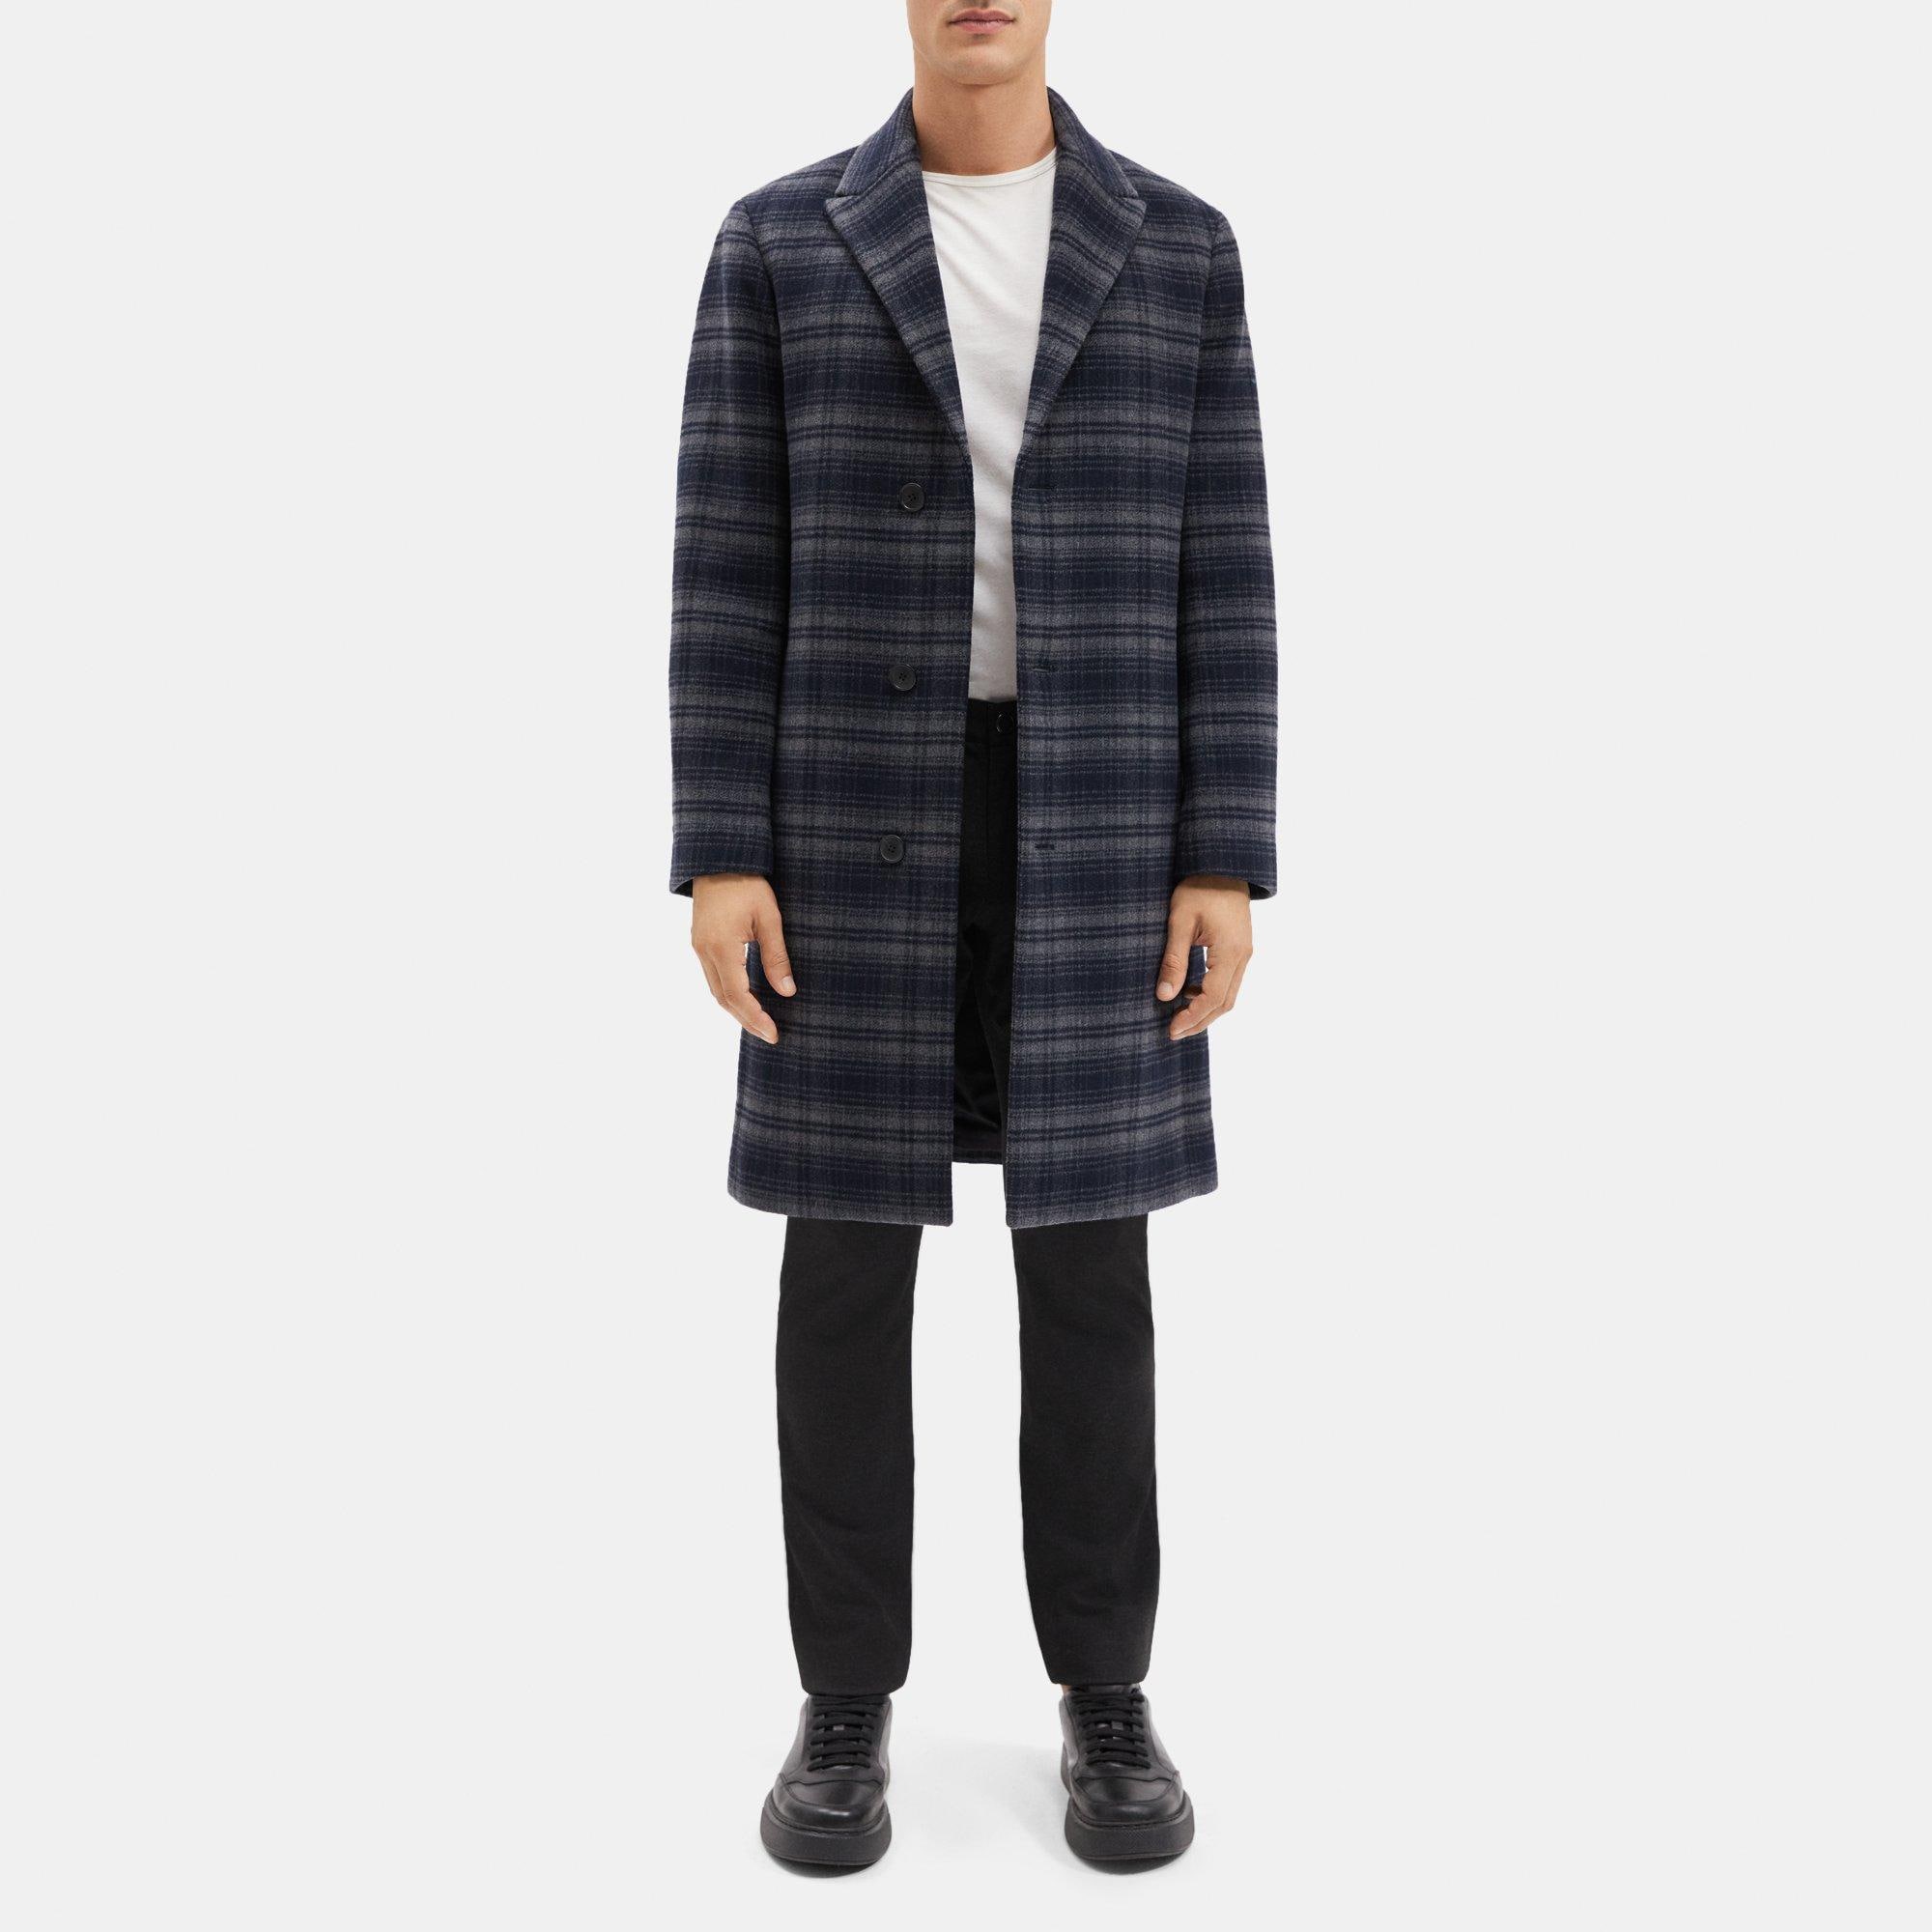 Theory Tailored Coat in Recycled Wool Melton